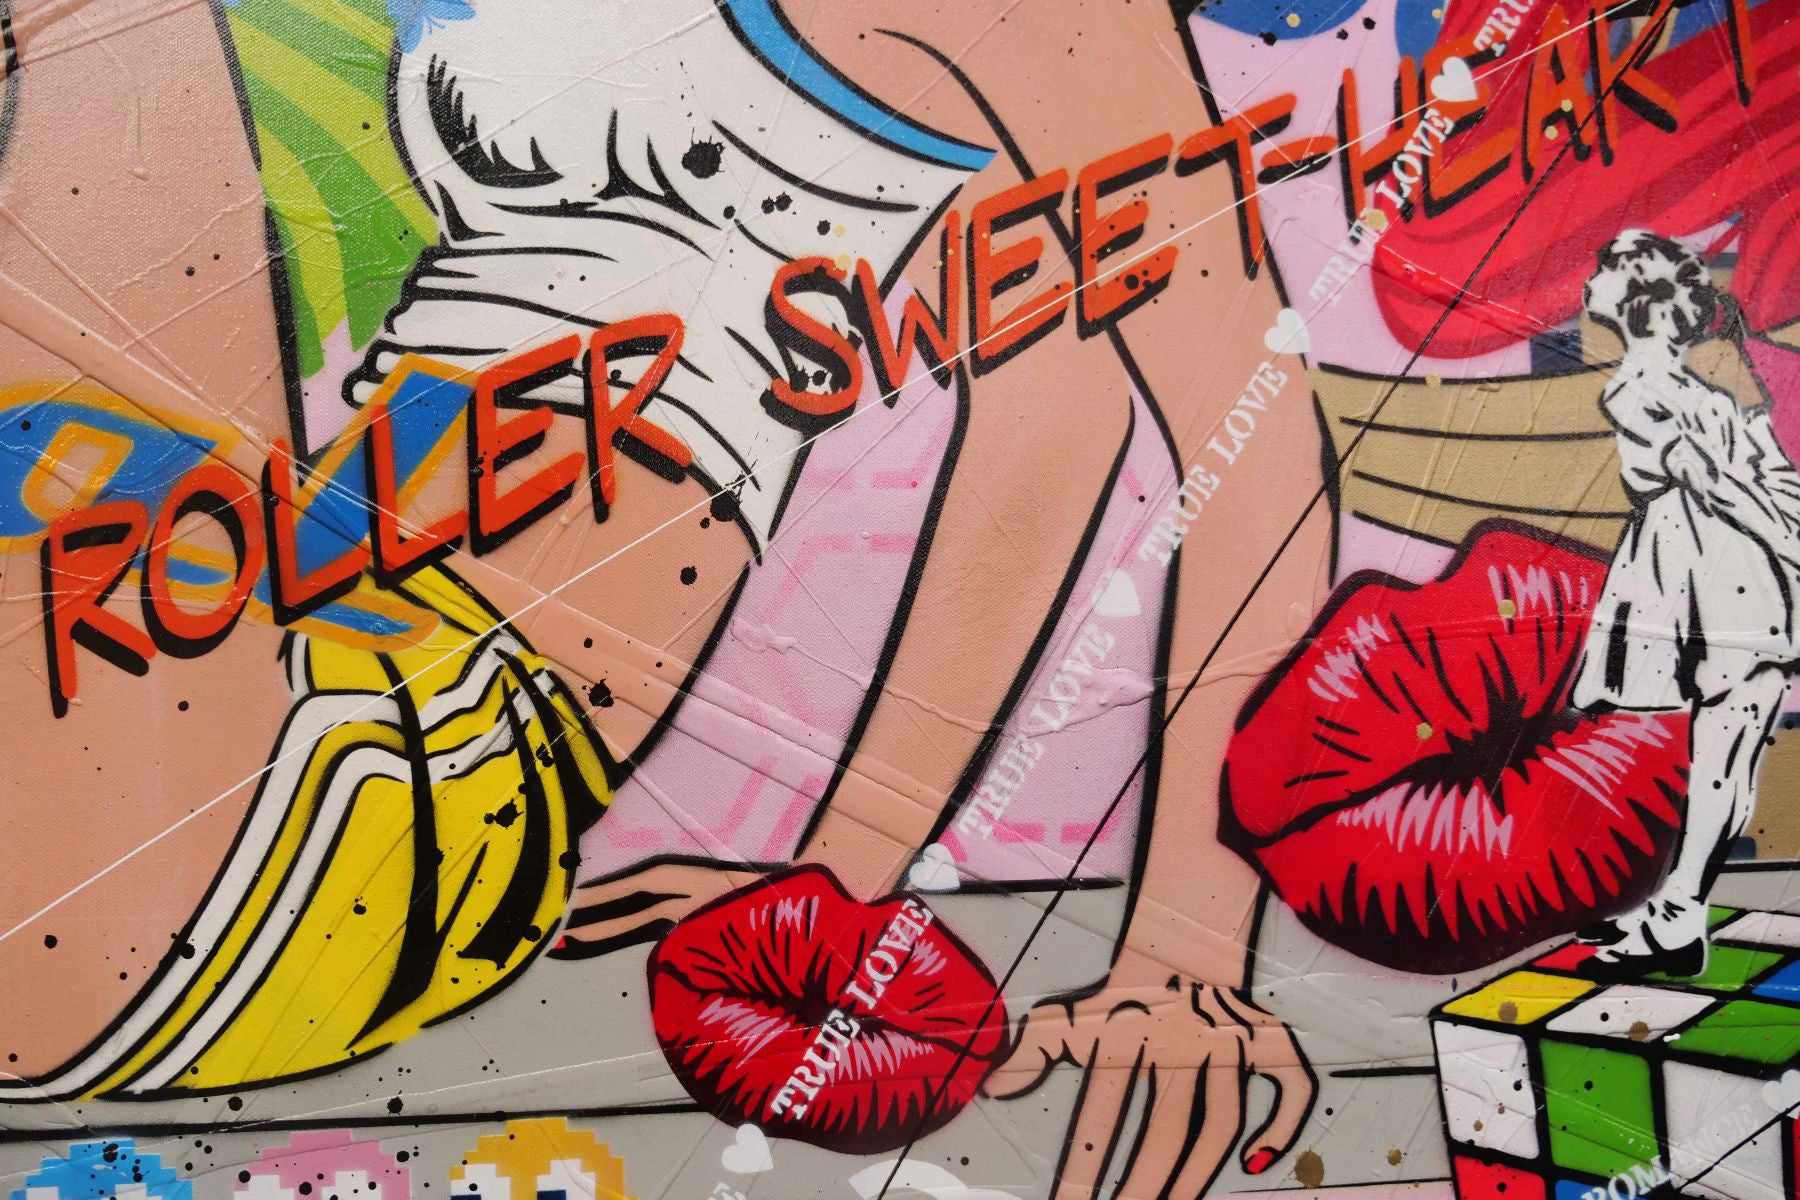 Let The Good Times Roll 140cm x 100cm Roller Skate Girl Textured Urban Pop Art Painting (SOLD)